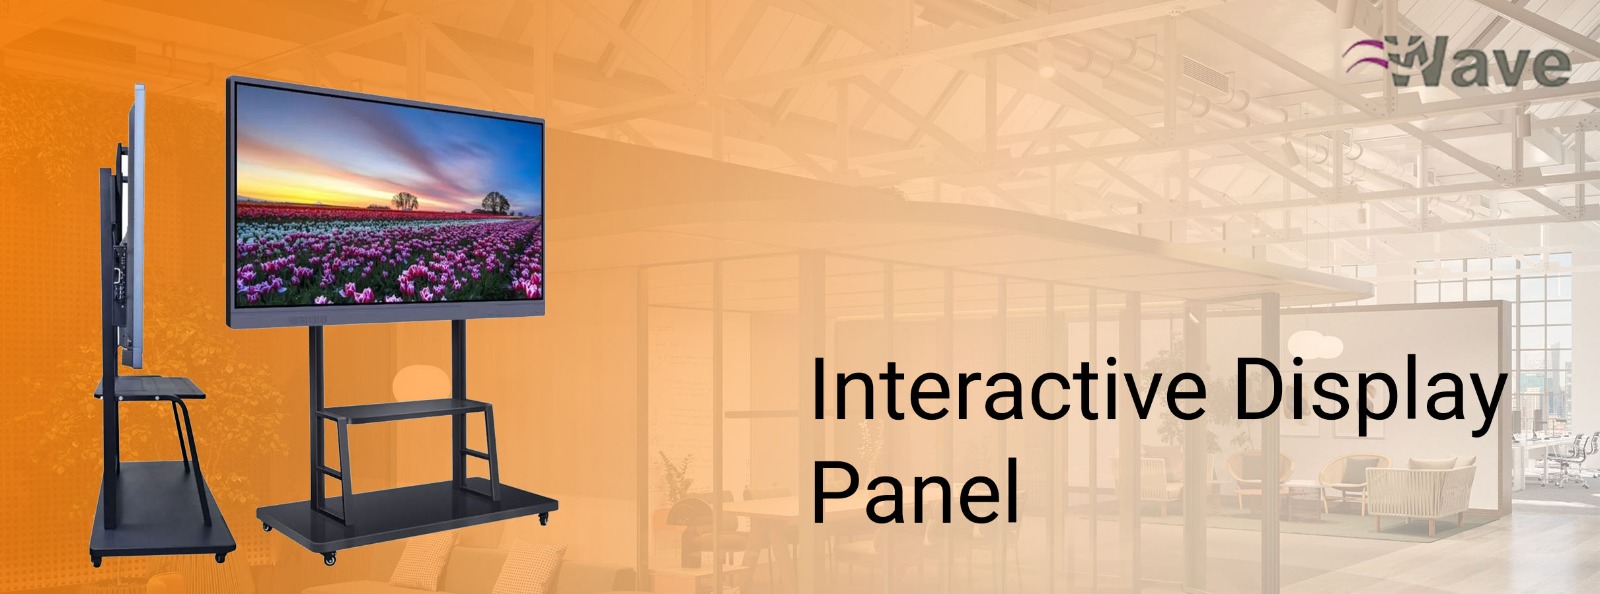 10 Innovative Uses of LED Display Panels in Retail